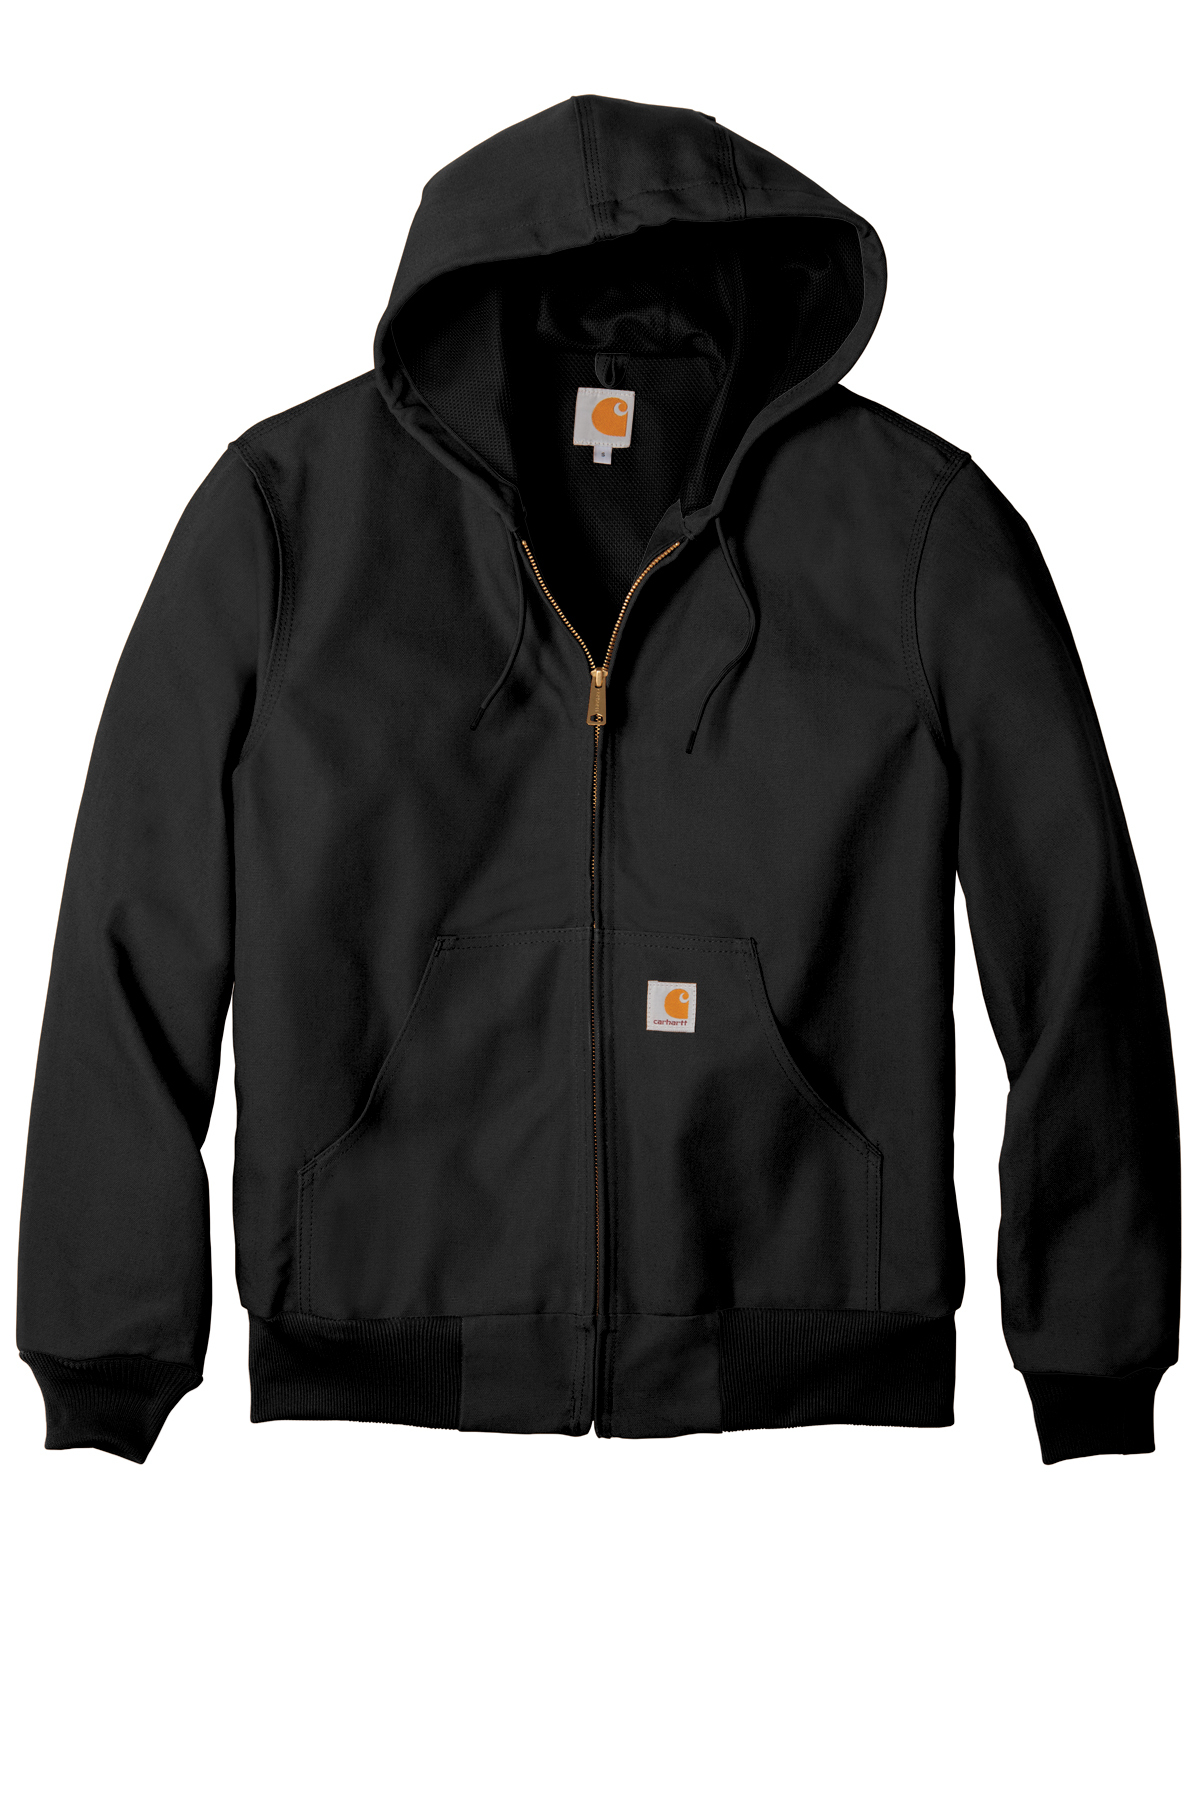 Carhartt Thermal-Lined Duck Active Jac | Product | SanMar